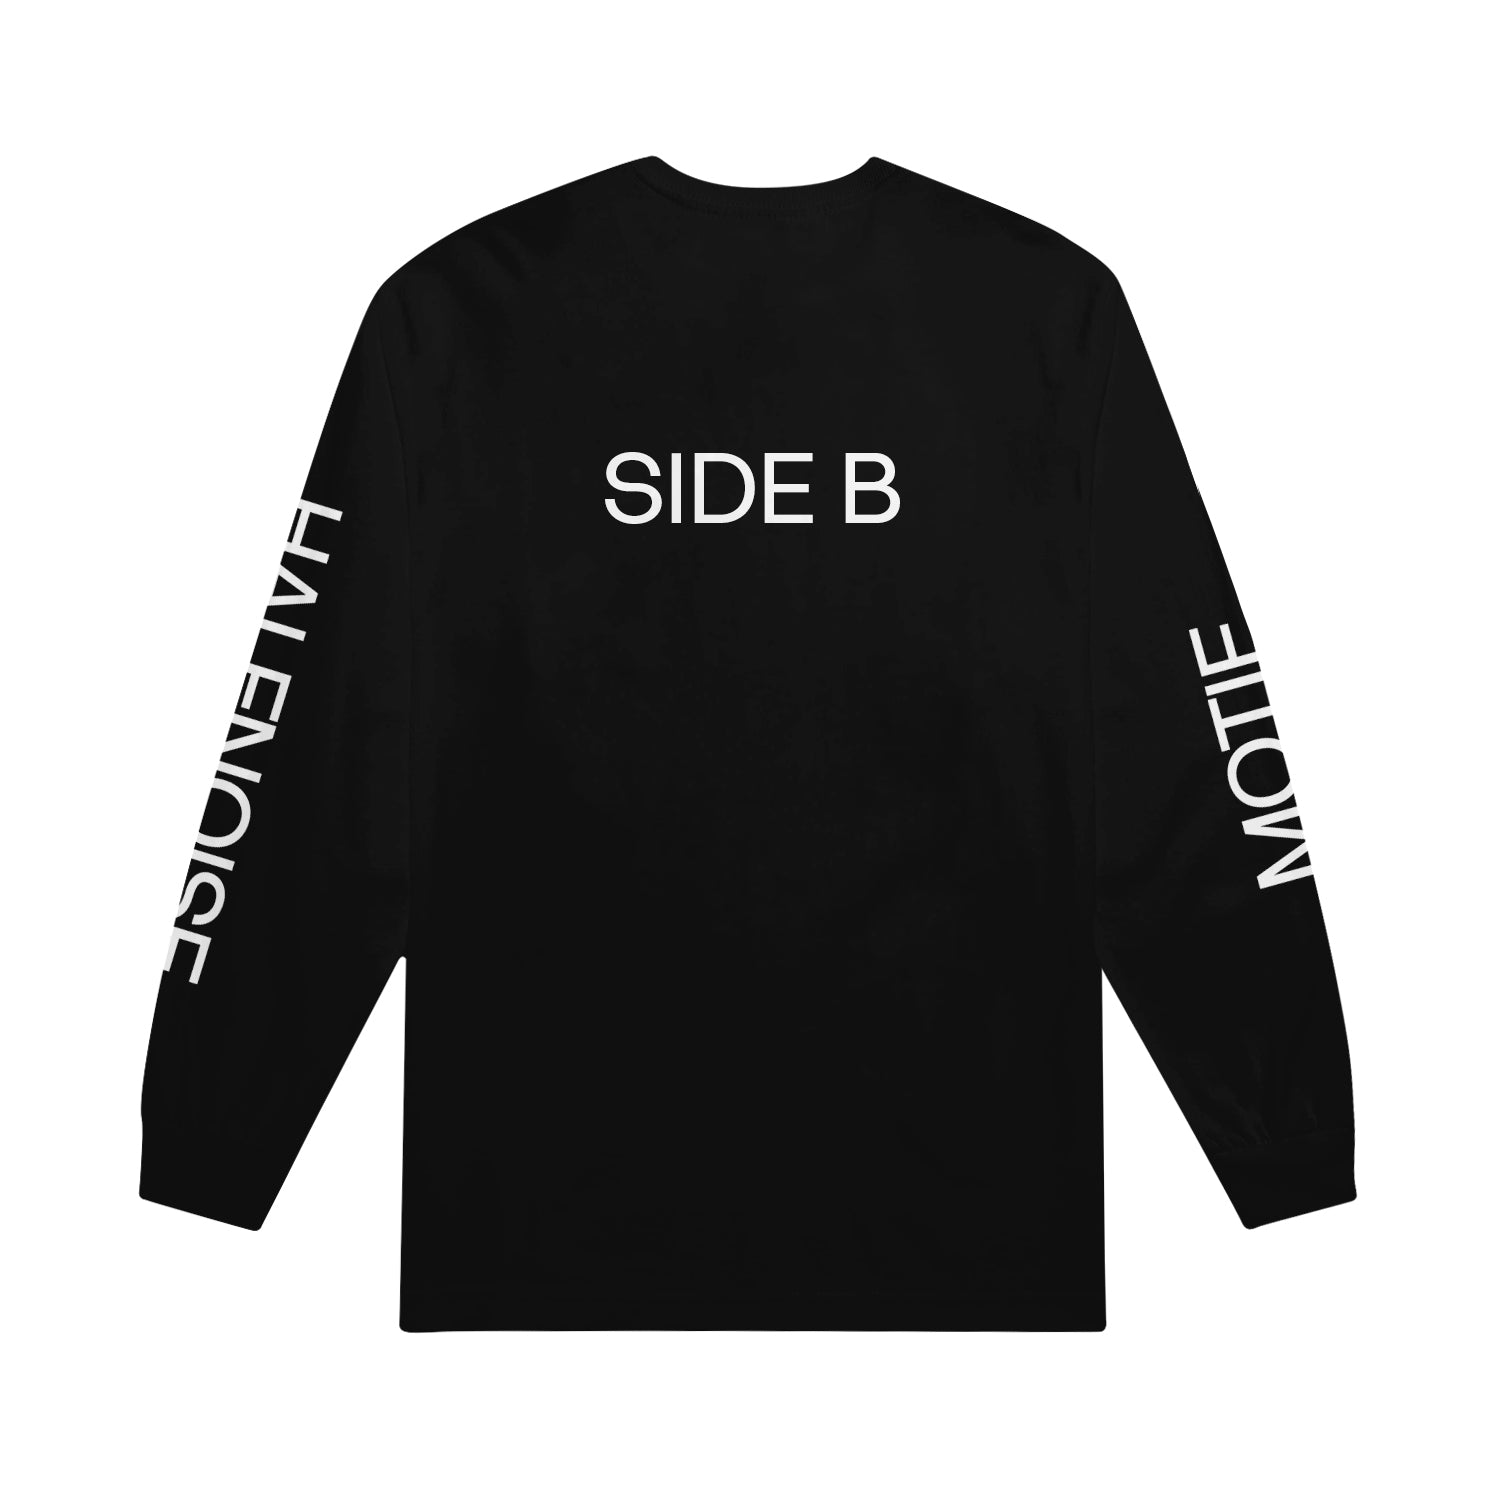 image of the back of a black long sleeve shirt on a white background. the back has a small center print in white that says SIDE B